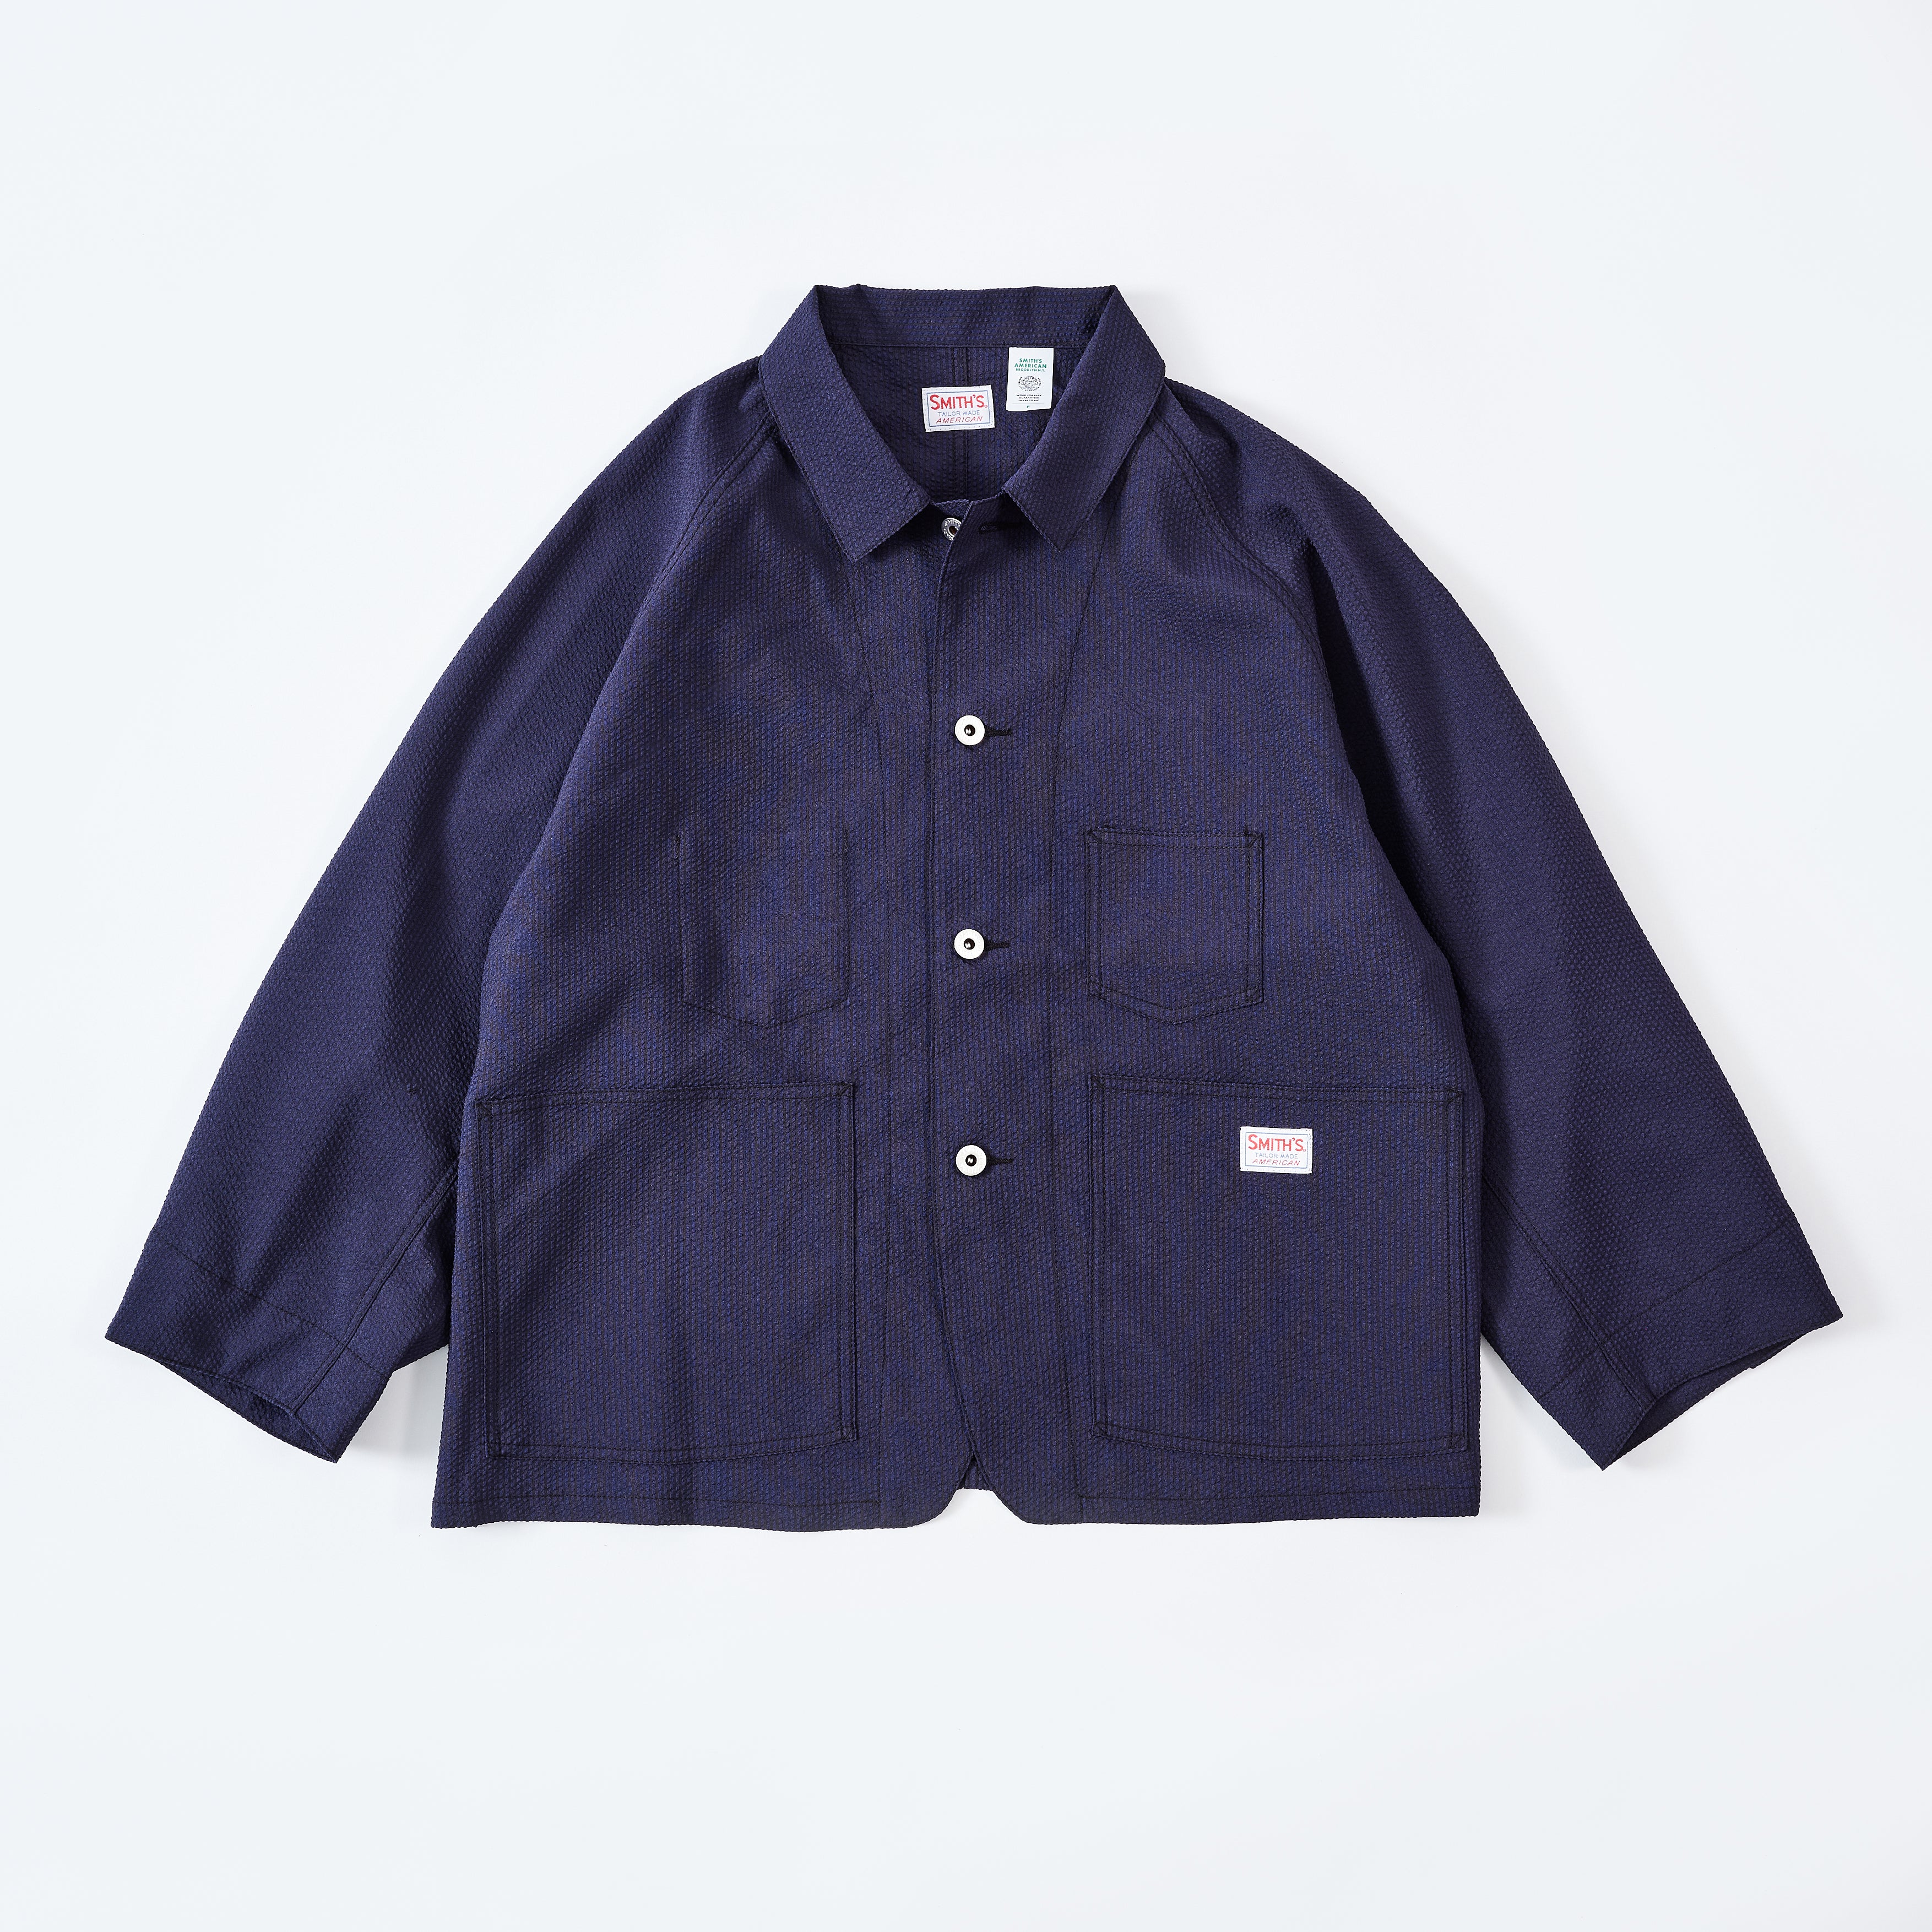 tops – ER smith's american